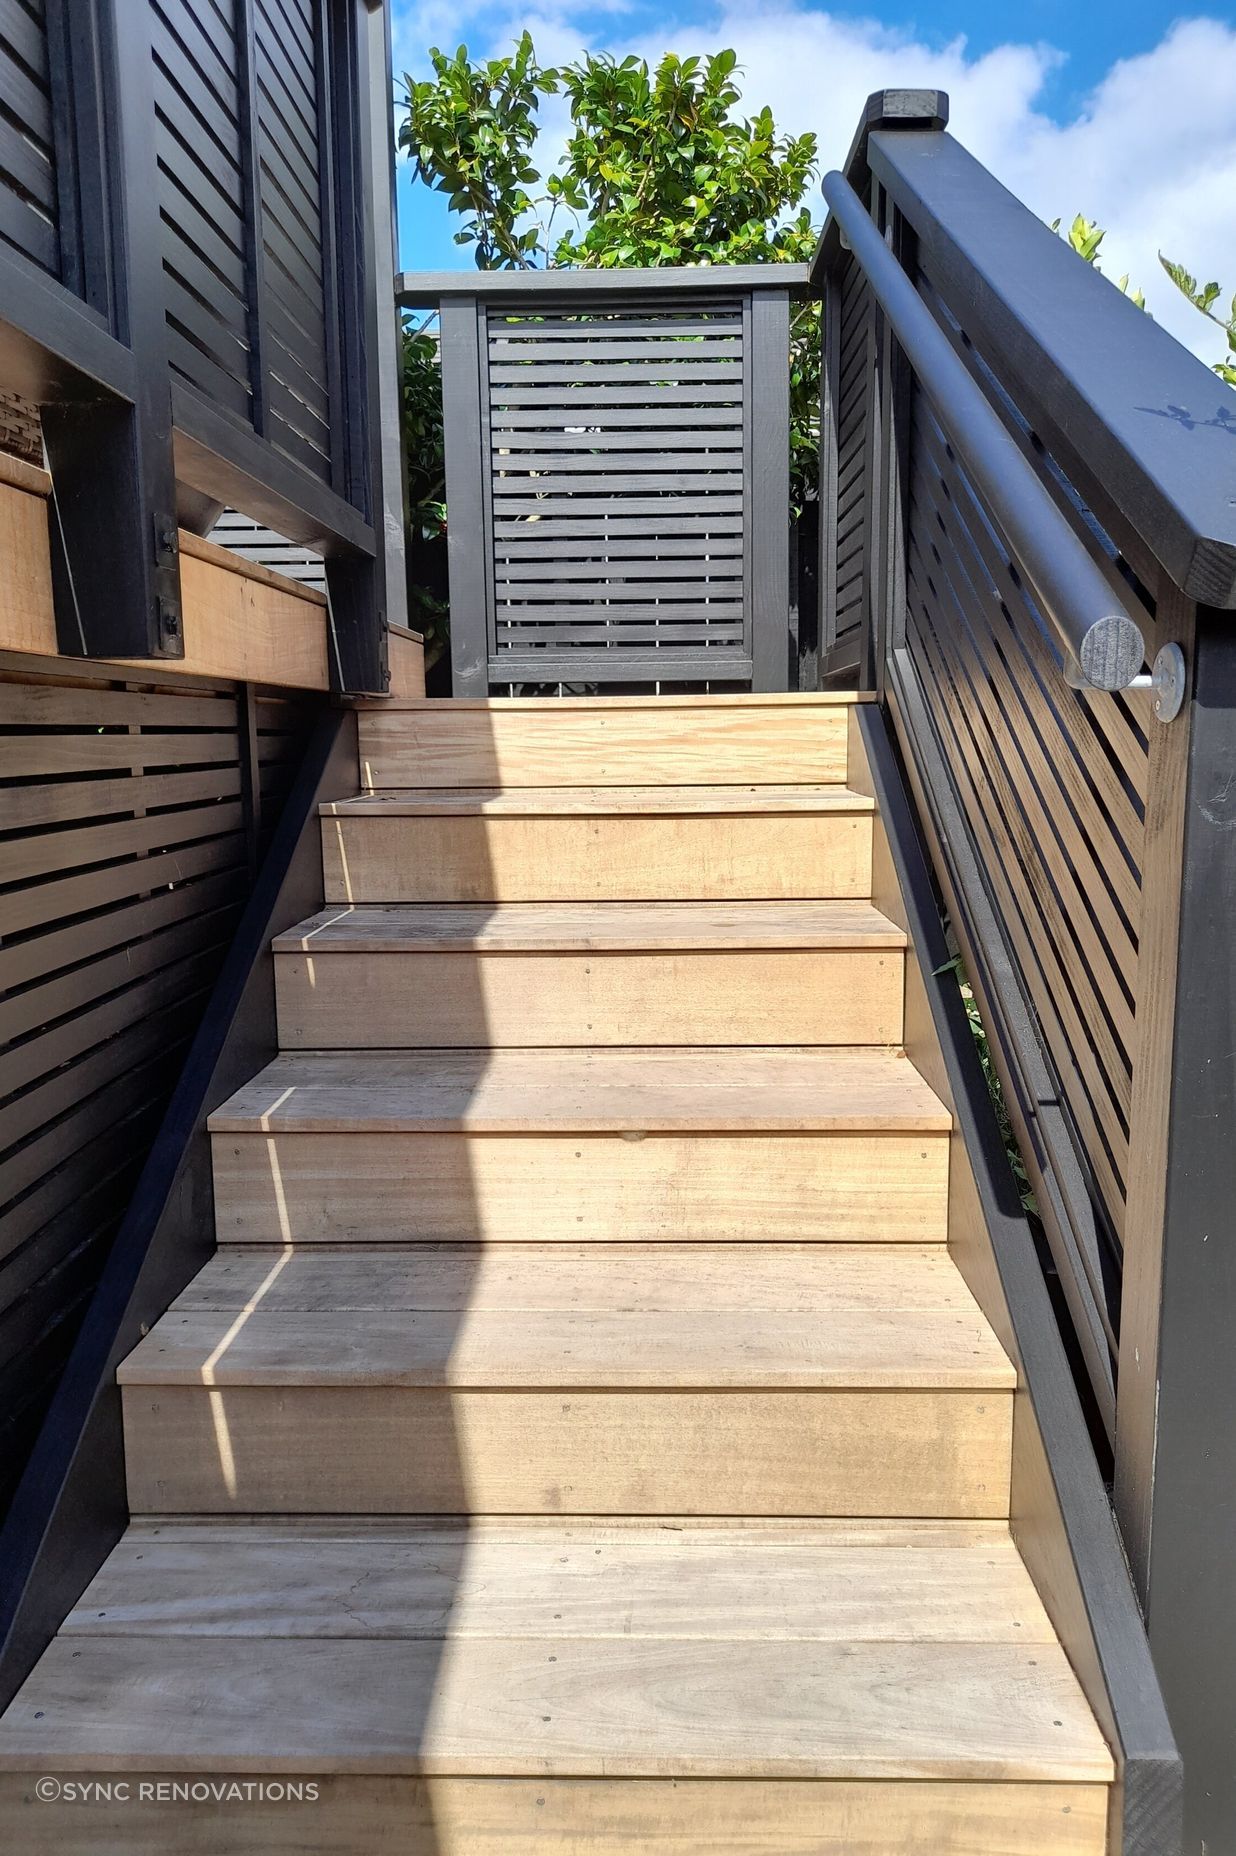 The new stairs leading onto the deck have a safety handrail for ease of use